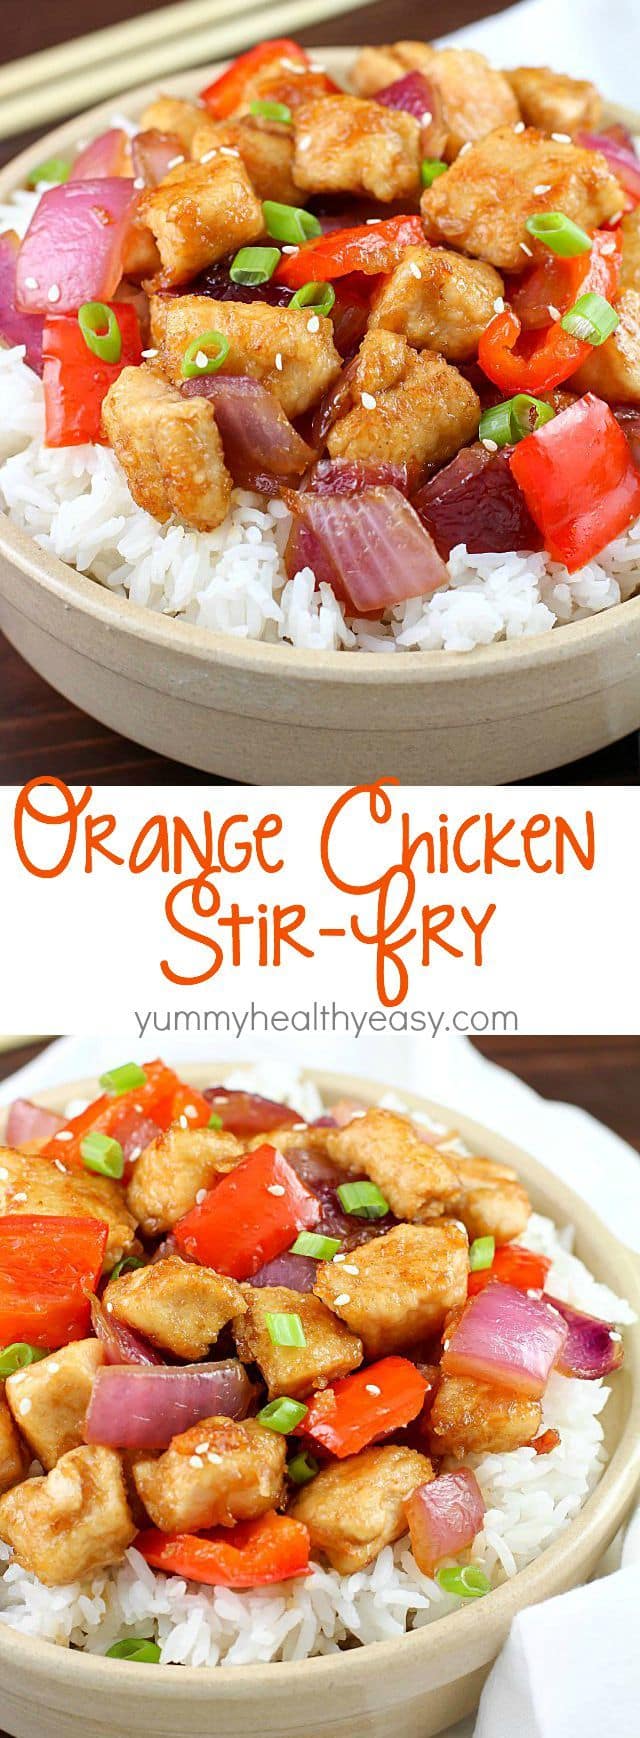 The most incredible Orange Chicken Stir Fry with pan seared chicken, red bell peppers, onion and a delicious sweet and savory sauce served over rice. So easy and so flavorful!